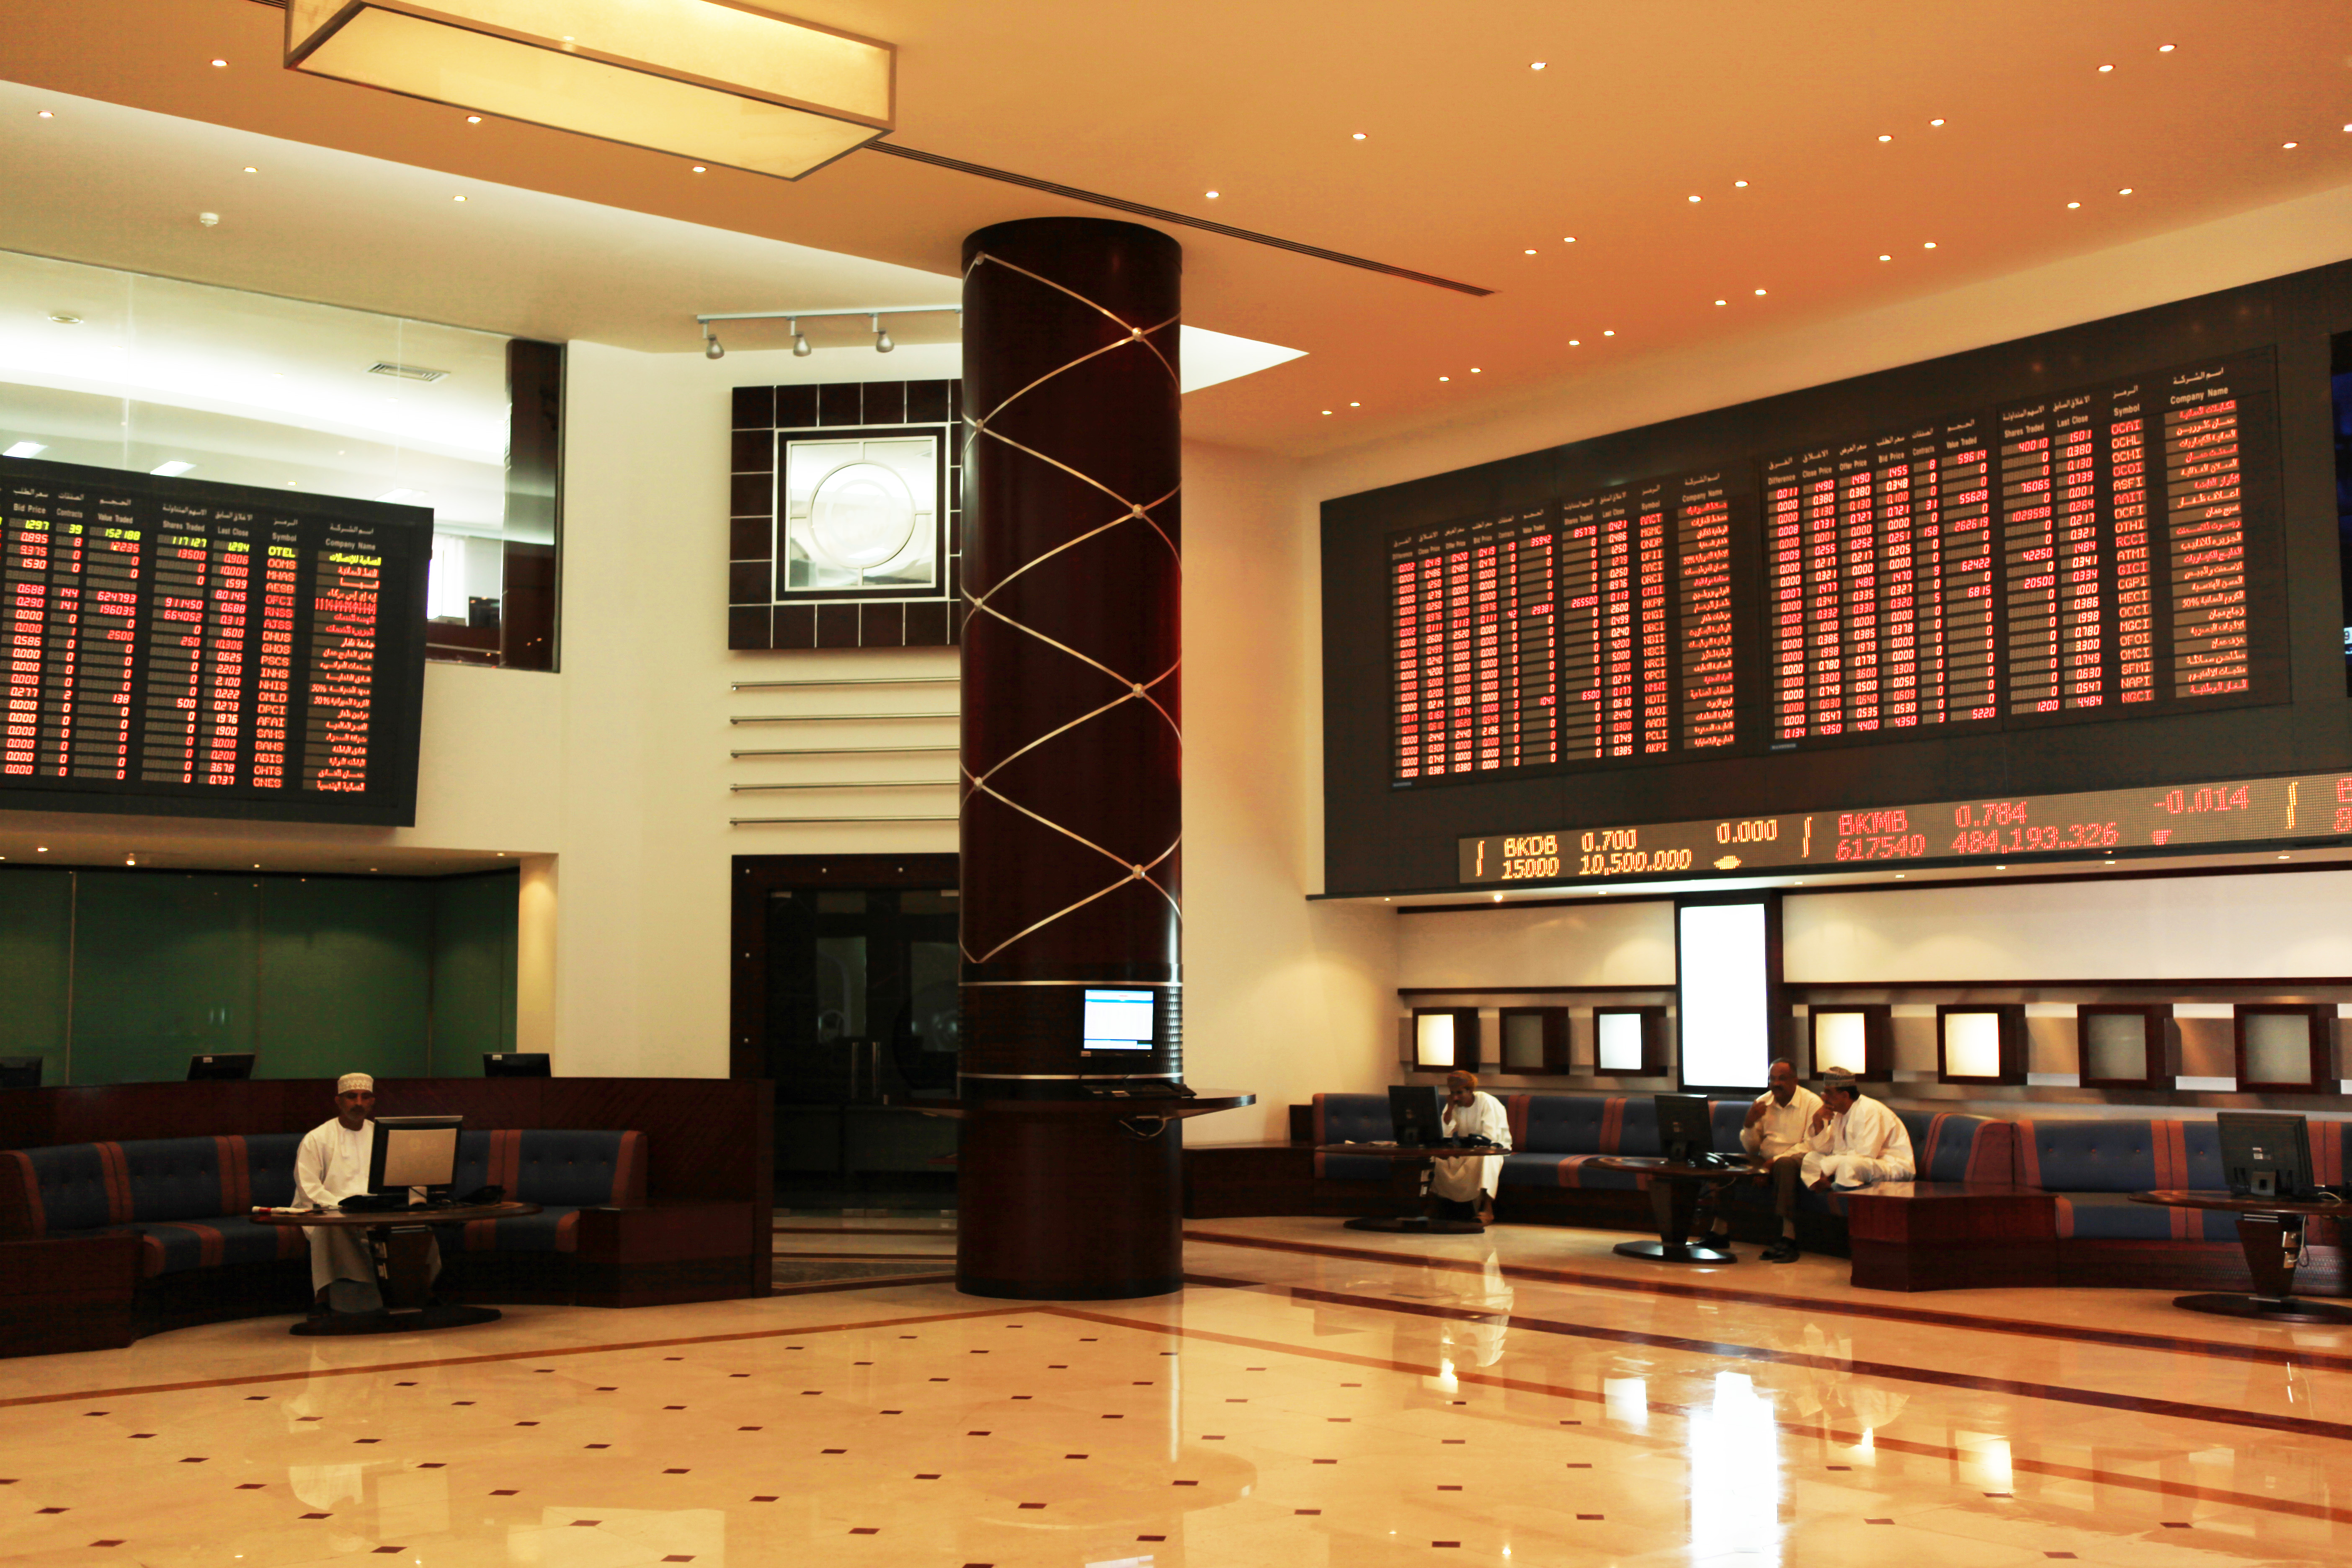 Oman's share index continues to decline